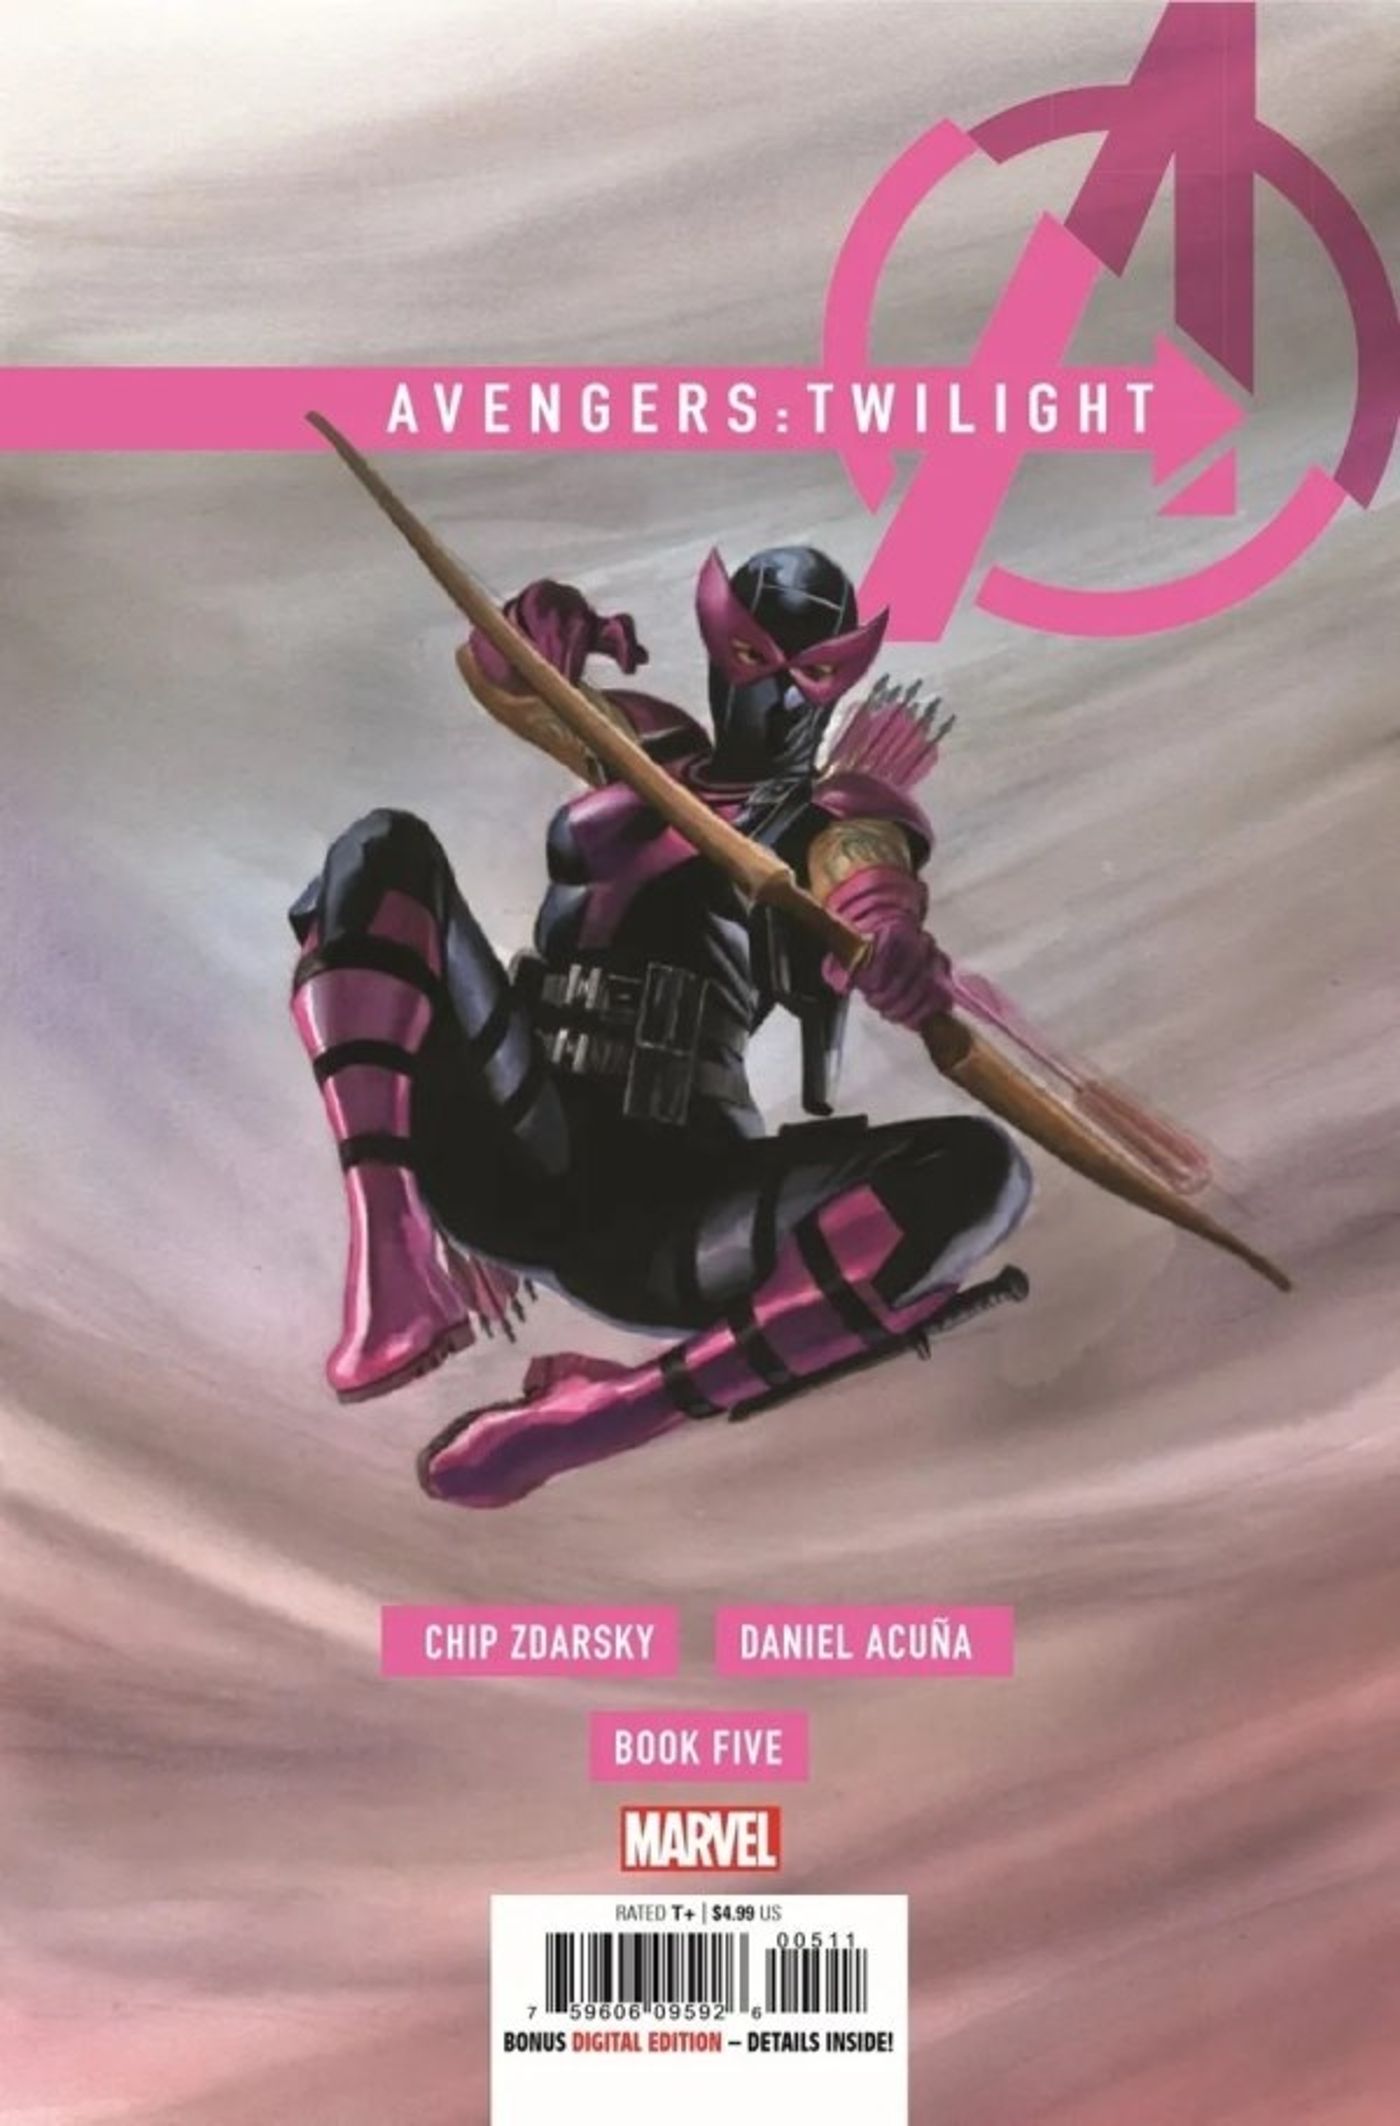 Avengers: Twilight #5 Cover Art Featuring Hawkeye